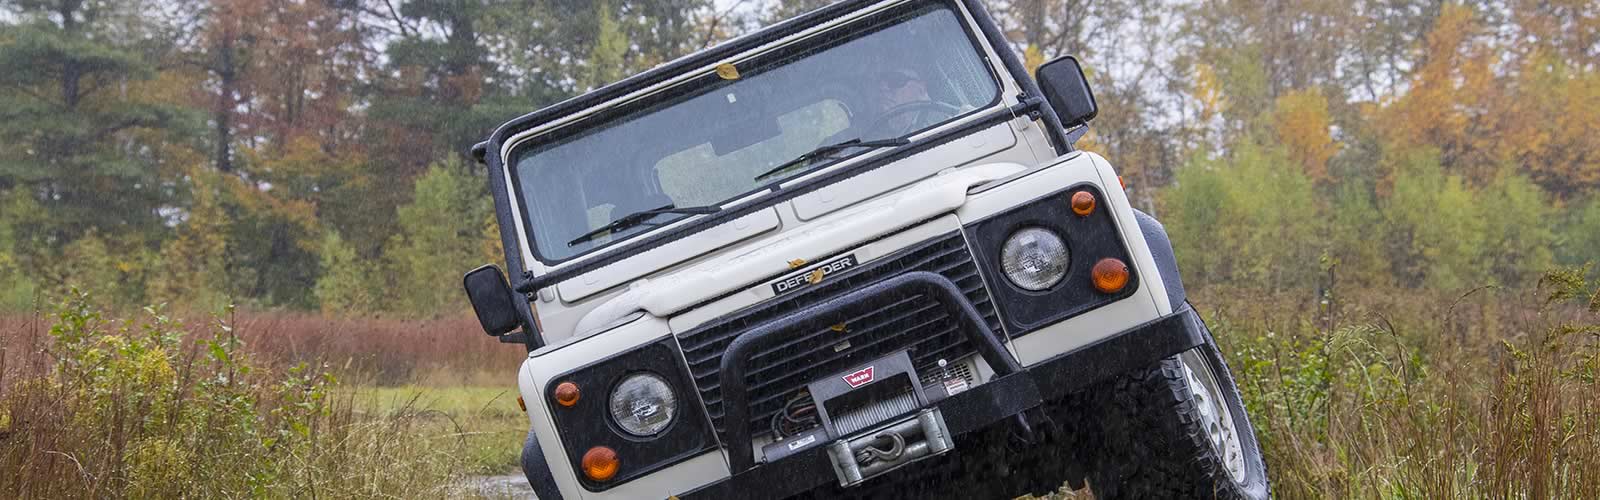 Gain A Greater Understanding Of Off Road Vehicle Control in 3 Land Rover Vehicles.<br><br>